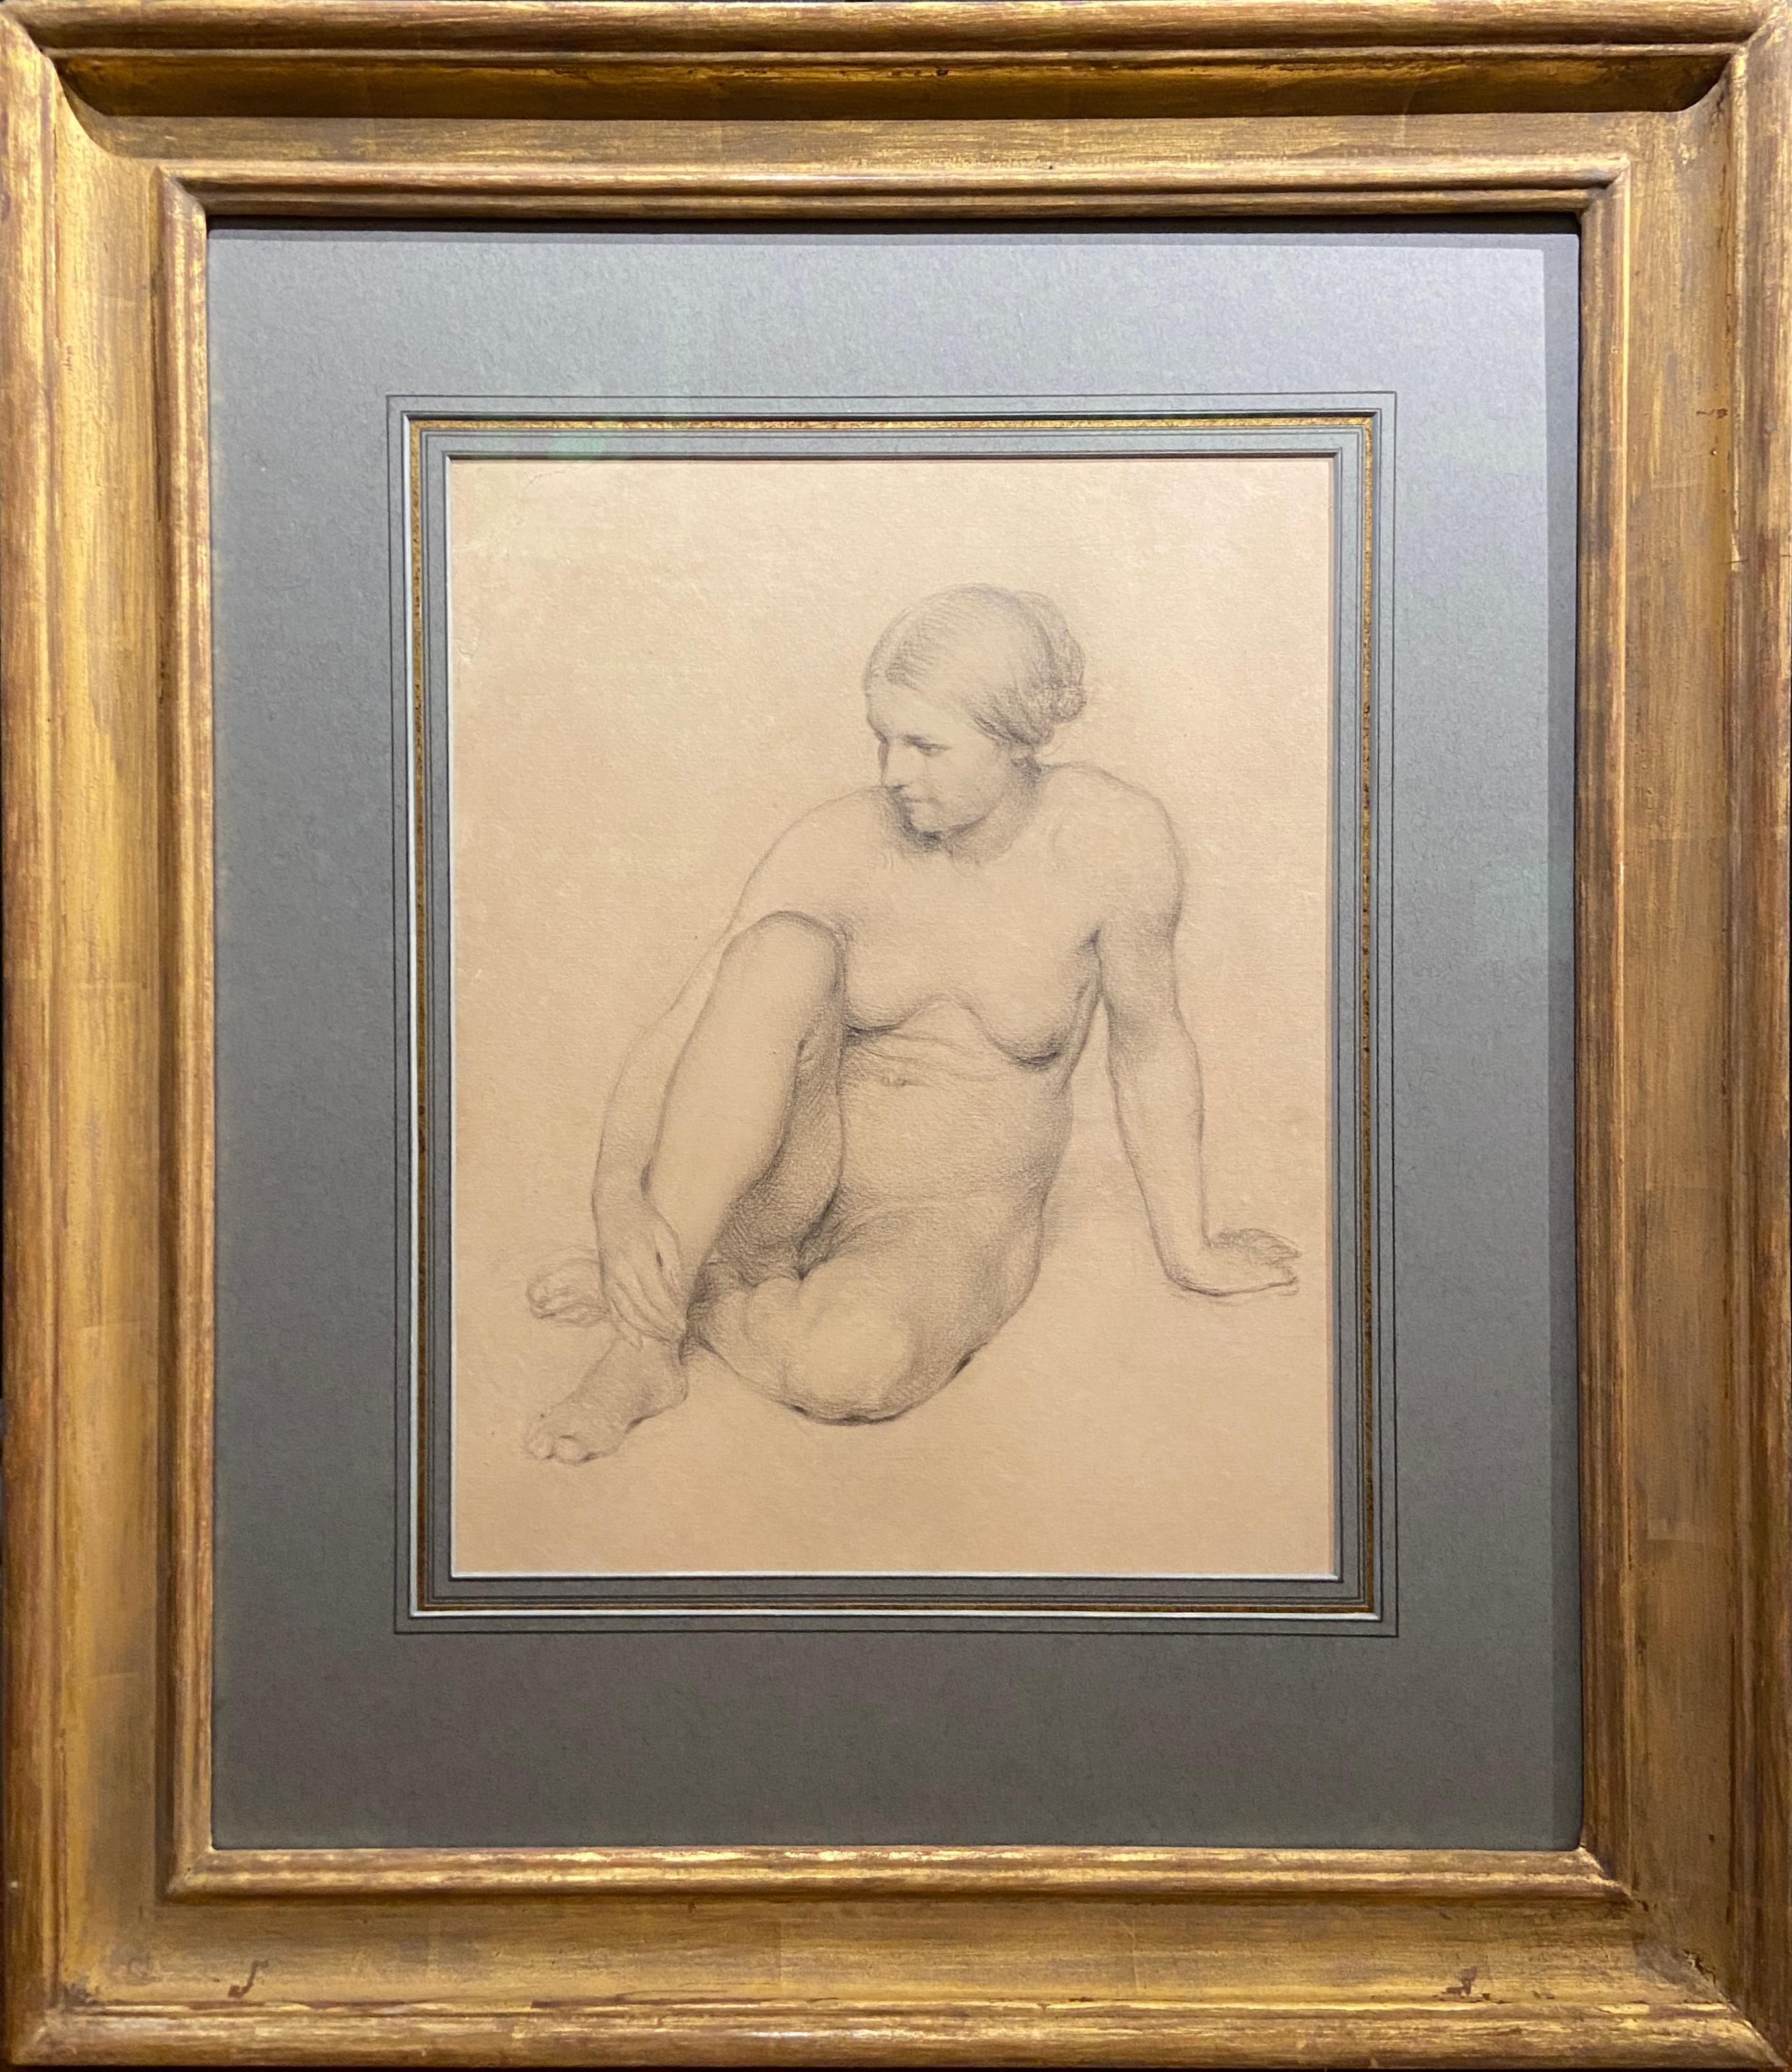 Graphite on paper
Image size: 13 x 10 1/2 inches (33 x 27 cm)
Mounted

This is a delicate 19th century academic graphite drawing of a seated female nude in the neoclassical style.

A well-executed drawing, the artist has managed to capture the quiet